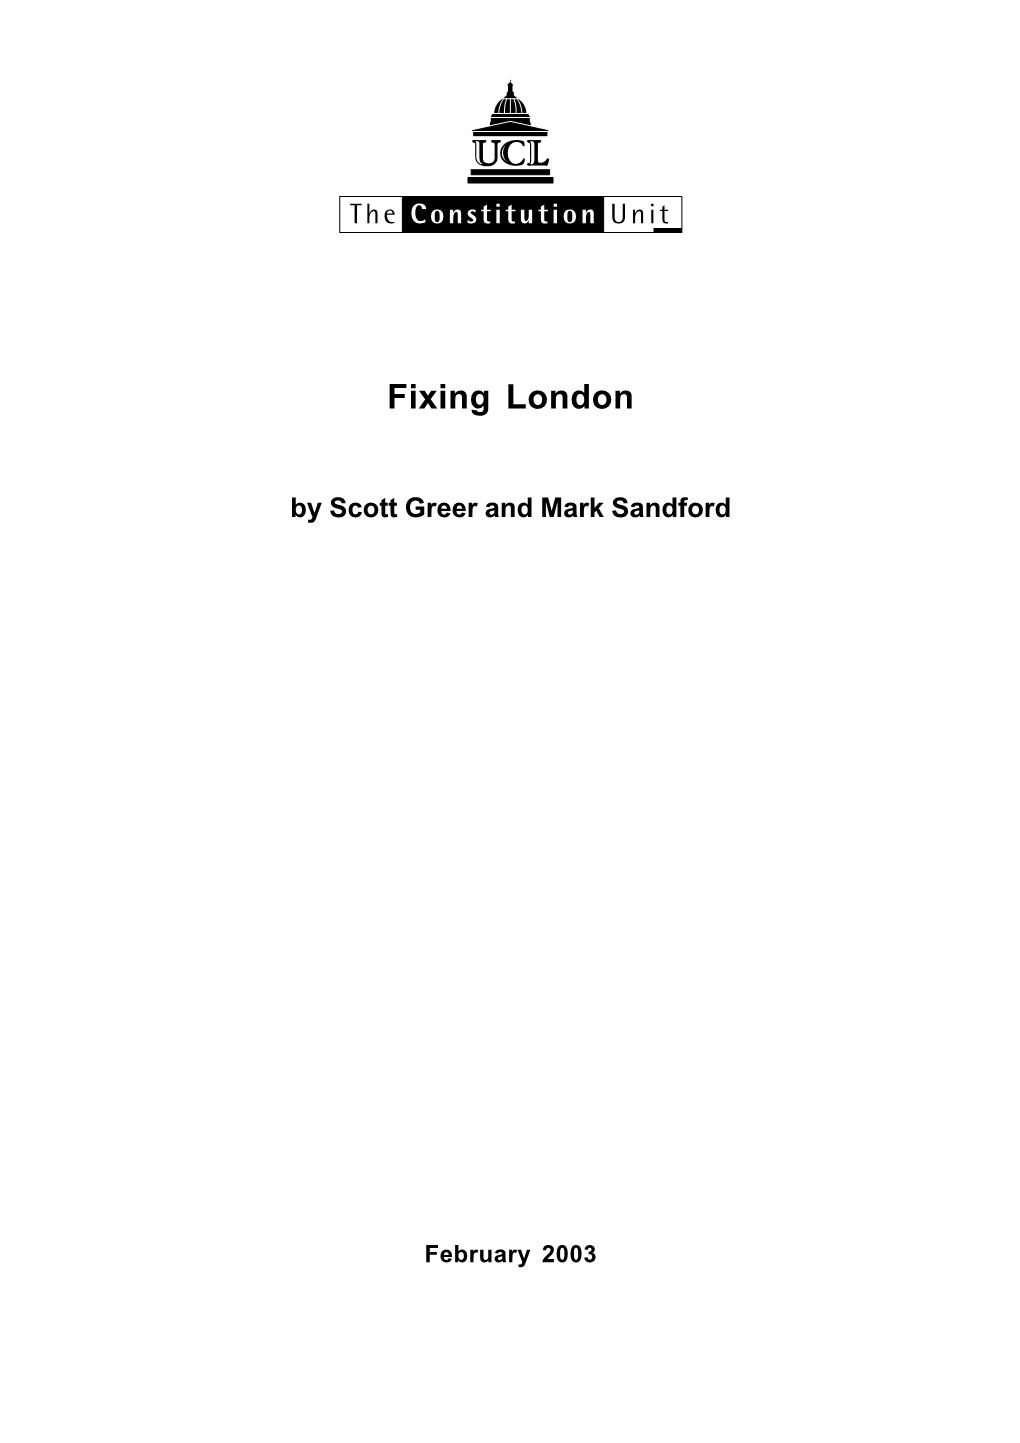 Fixing London by Scott Greer and Mark Sandford